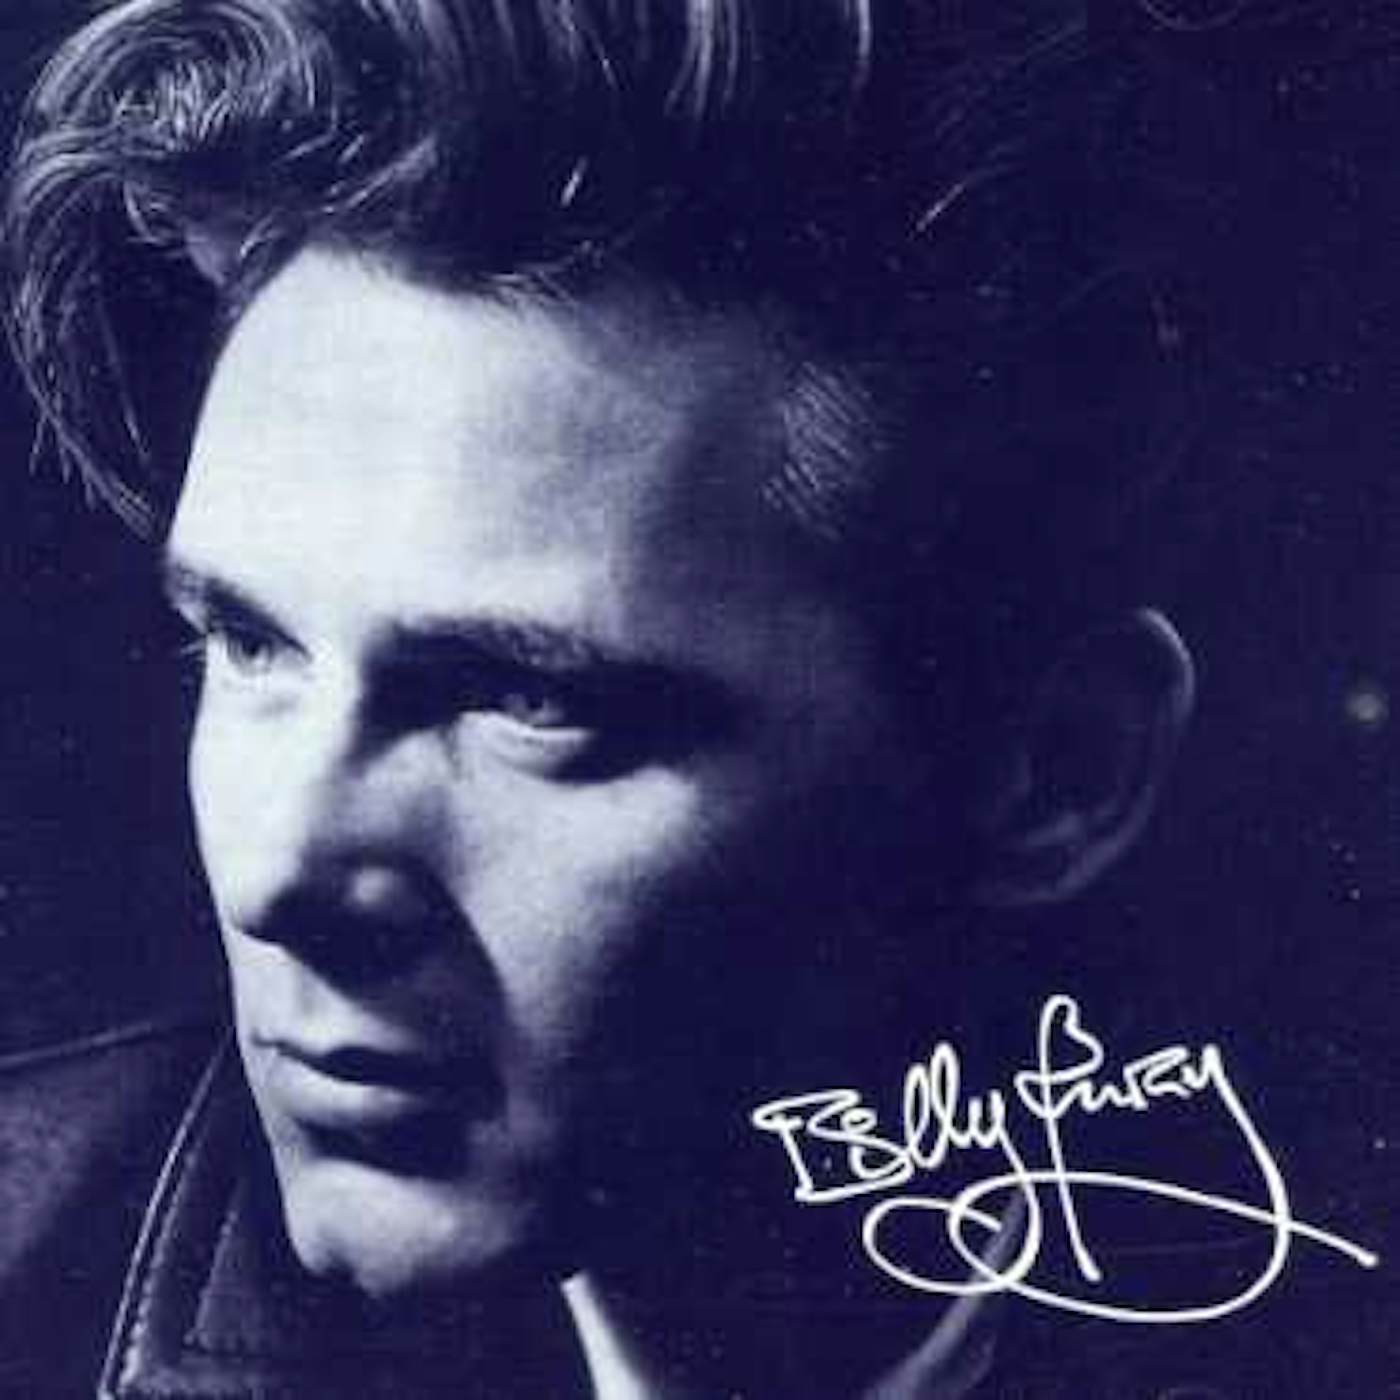 Billy Fury 40TH ANNIVERSARY ANTHOLOGY CD